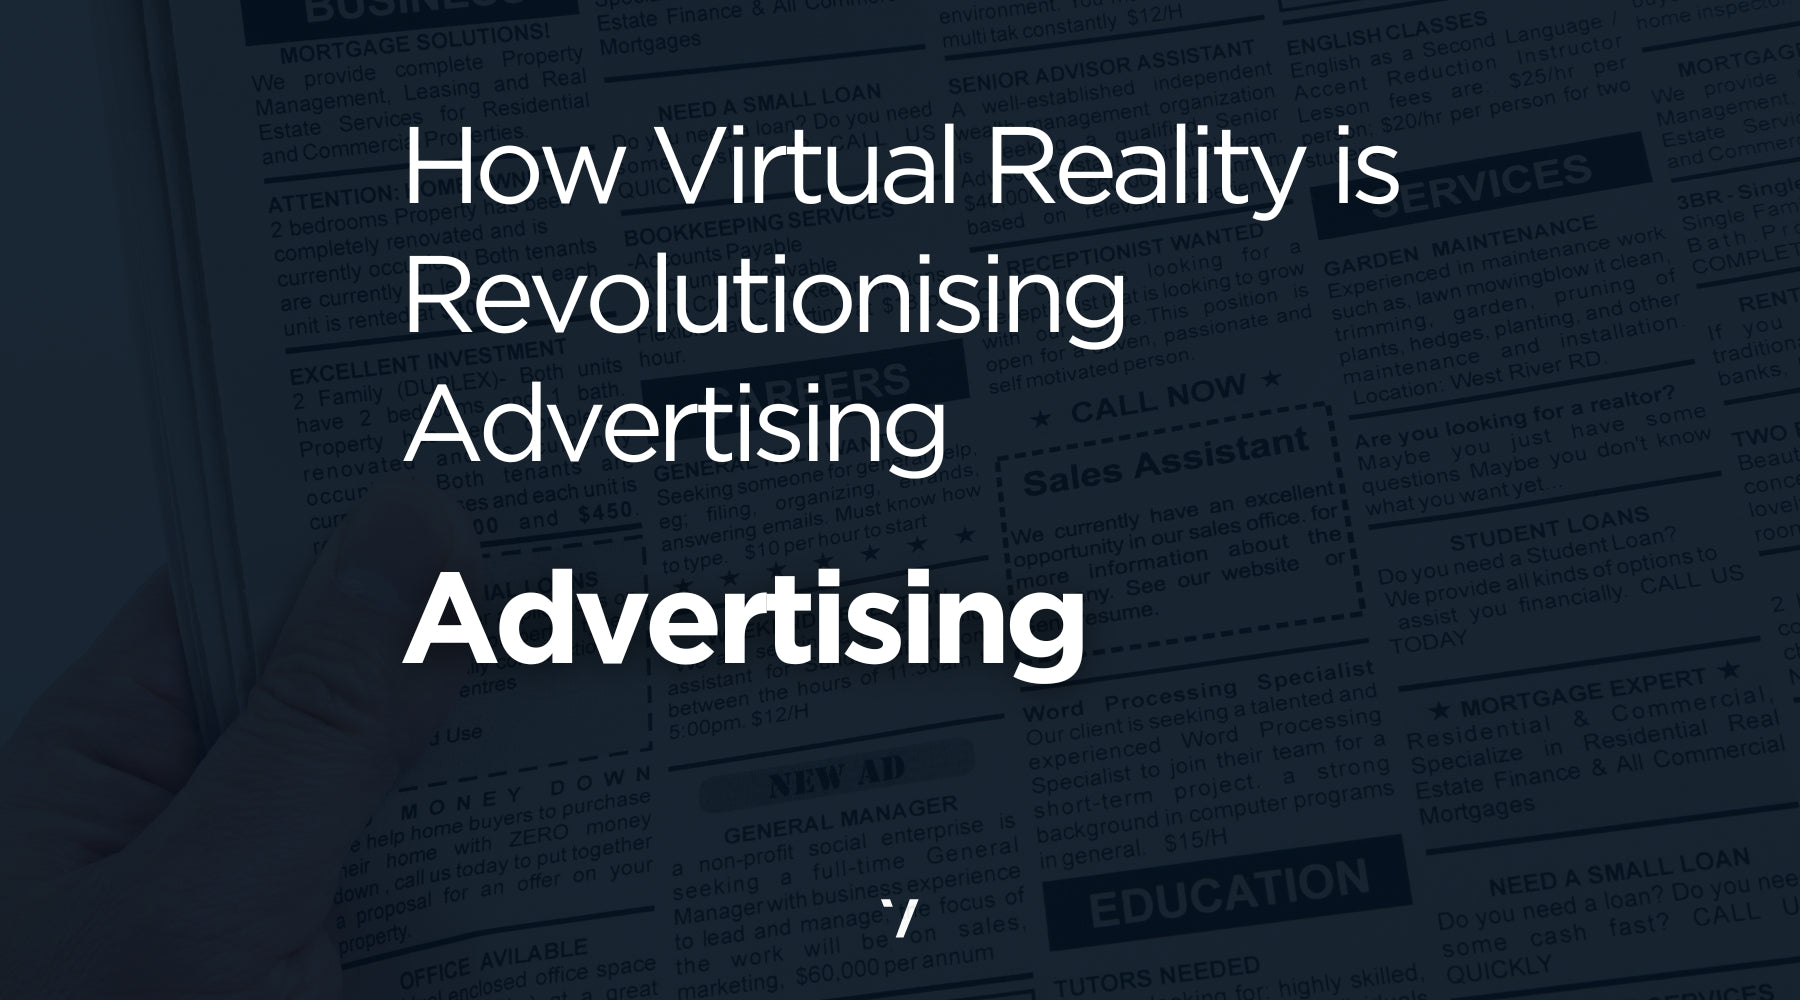 How Virtual Reality is Revolutionising Advertising